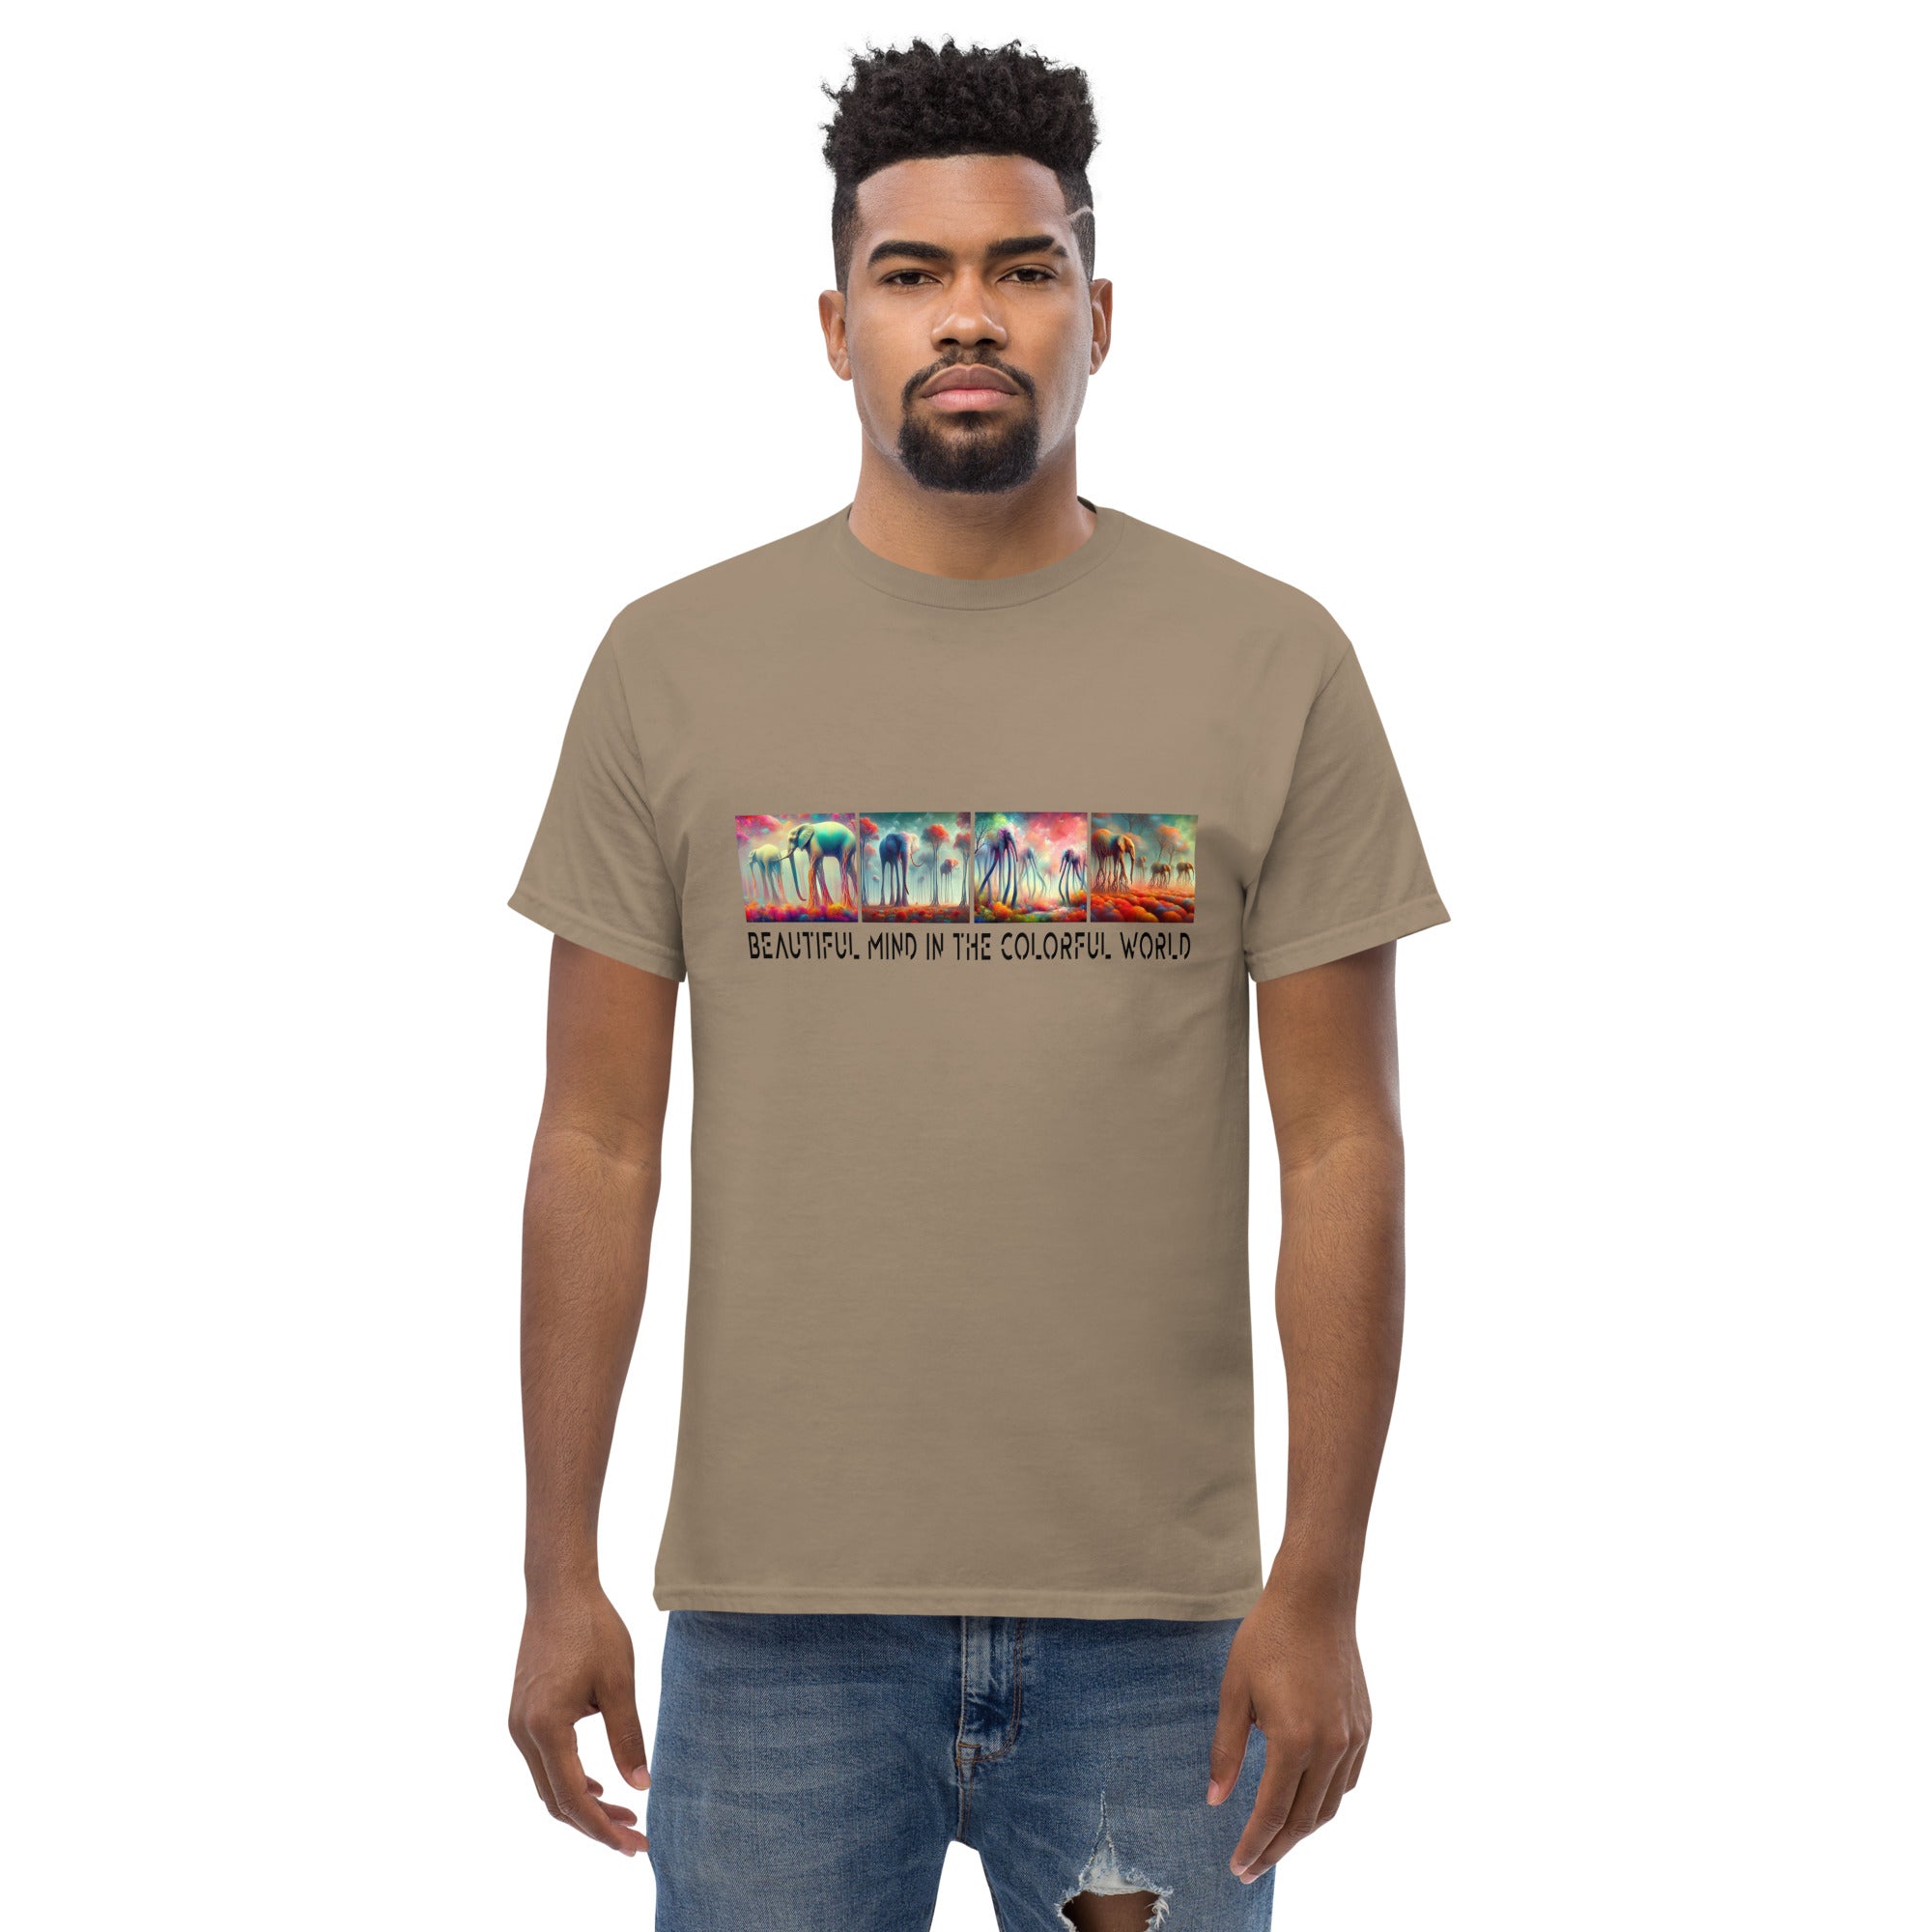 BEAUTIFUL MIND IN THE COLORFUL WORLD Men's classic tee